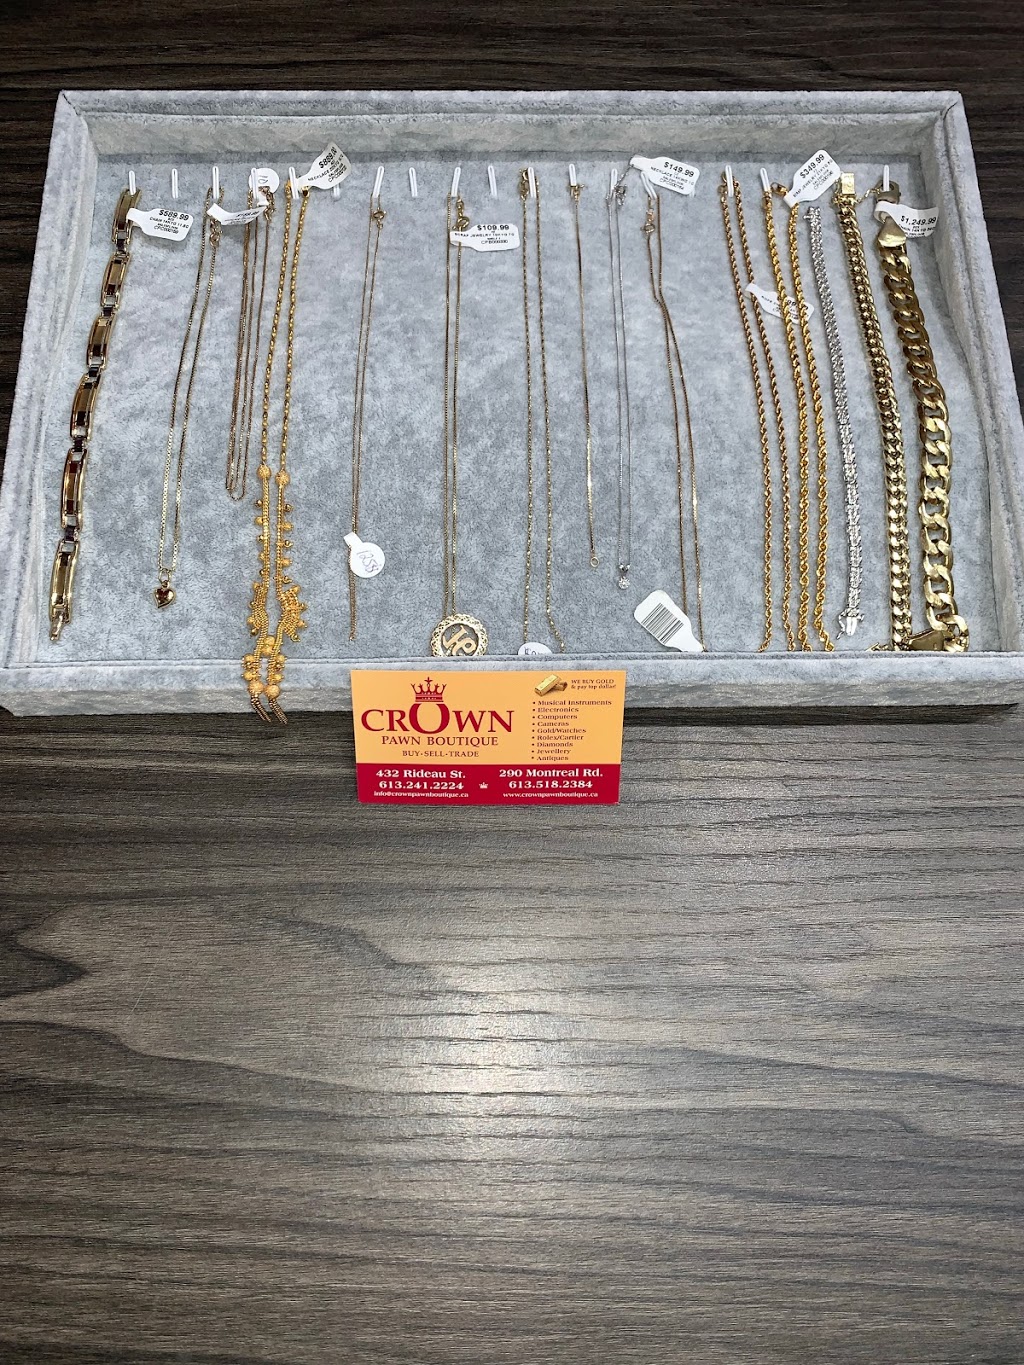 Crown Pawn Boutique | jewelry store | 432 Rideau St, Ottawa, ON K1N 5Z1, Canada | 6132412224 OR +1 613-241-2224